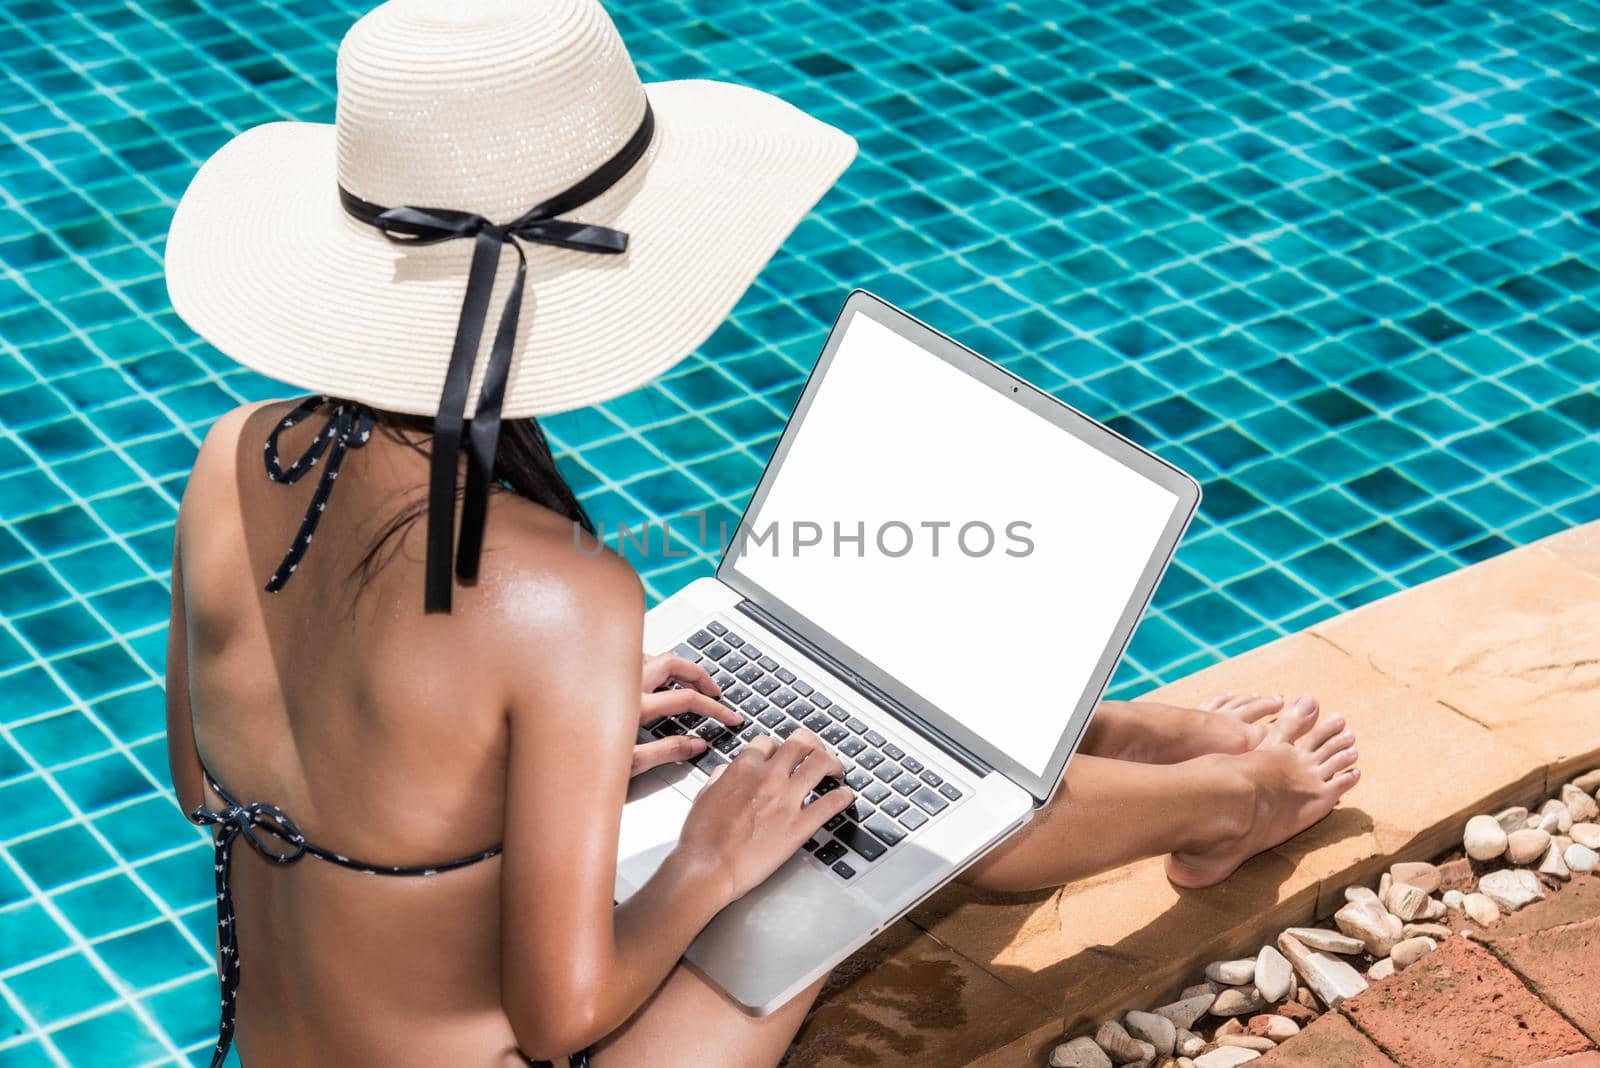 Asian Woman working on laptop computer sitting at poolside blue water